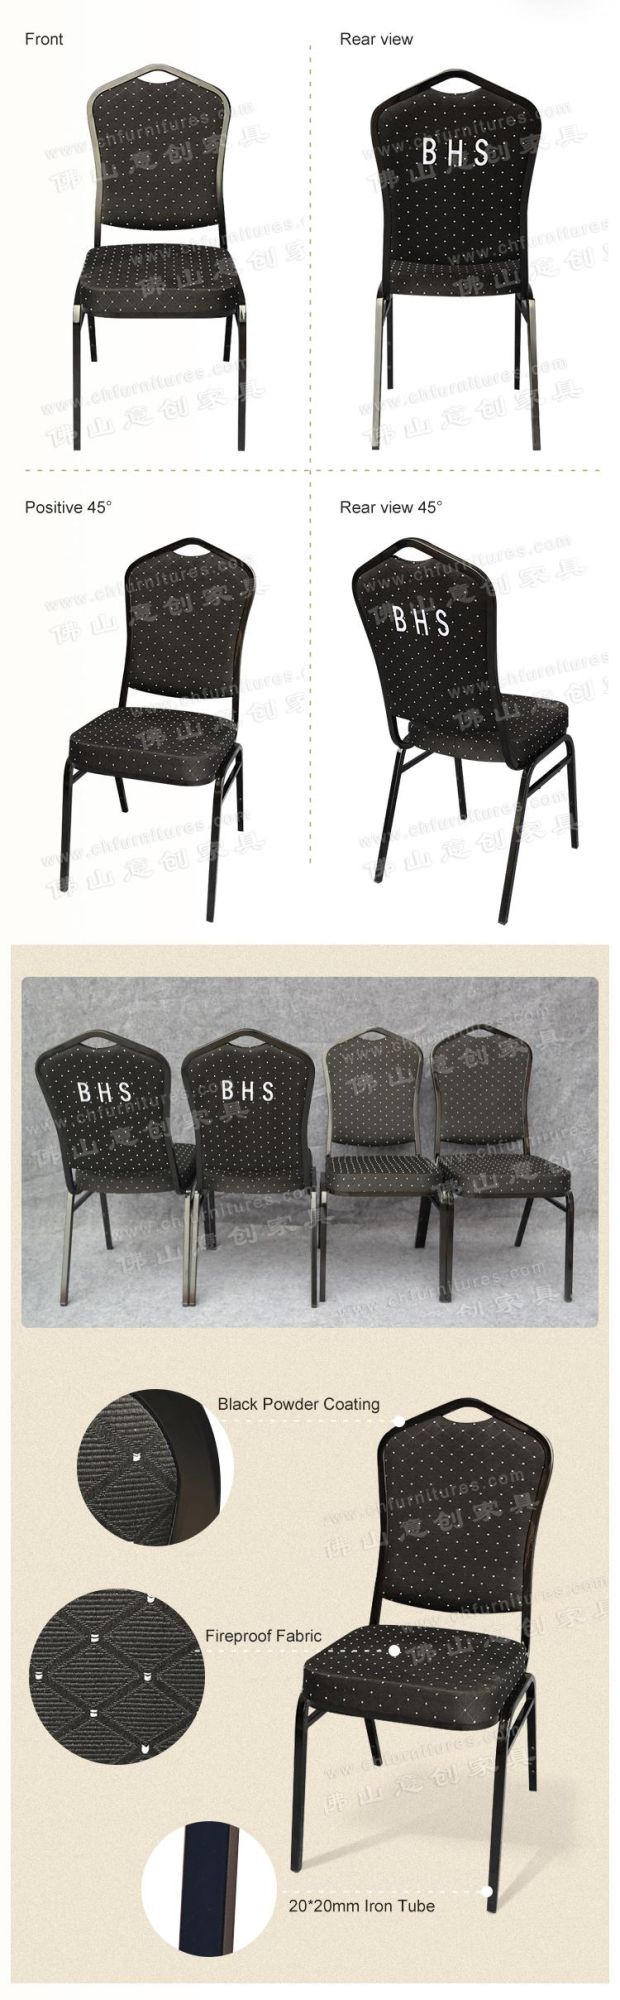 Used Banquet Chairs Hotel Furniture for Sale